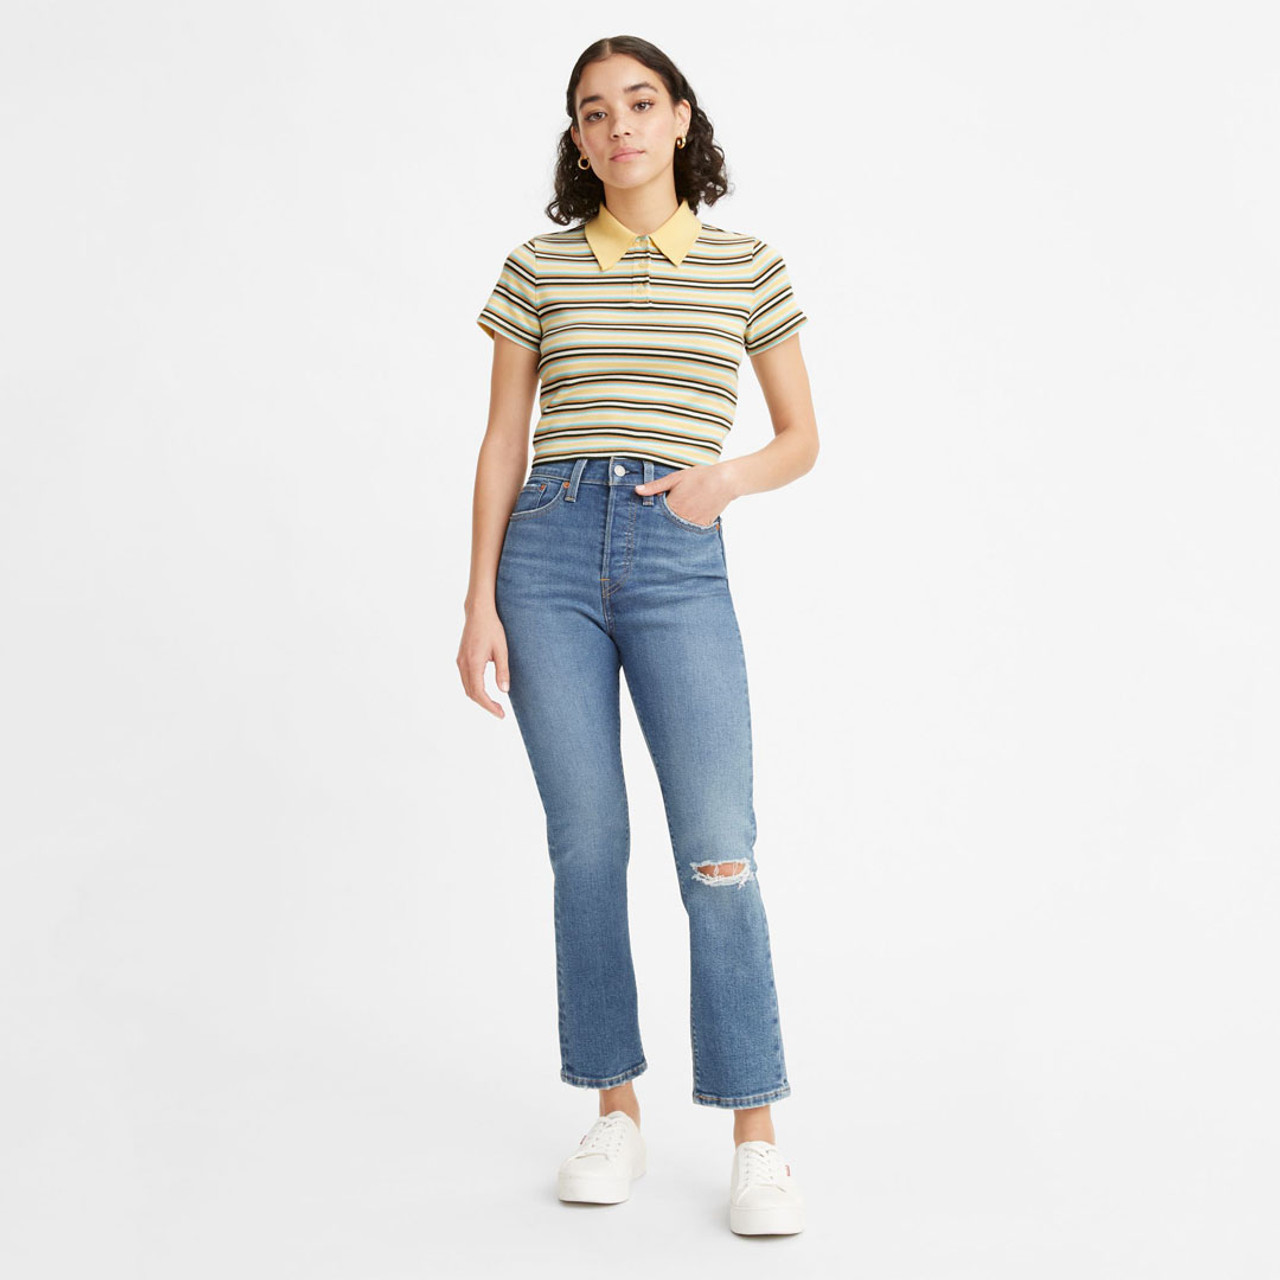 Levi's® Wedgie Straight Stretch Jean - Women's Jeans in Cut and Dry